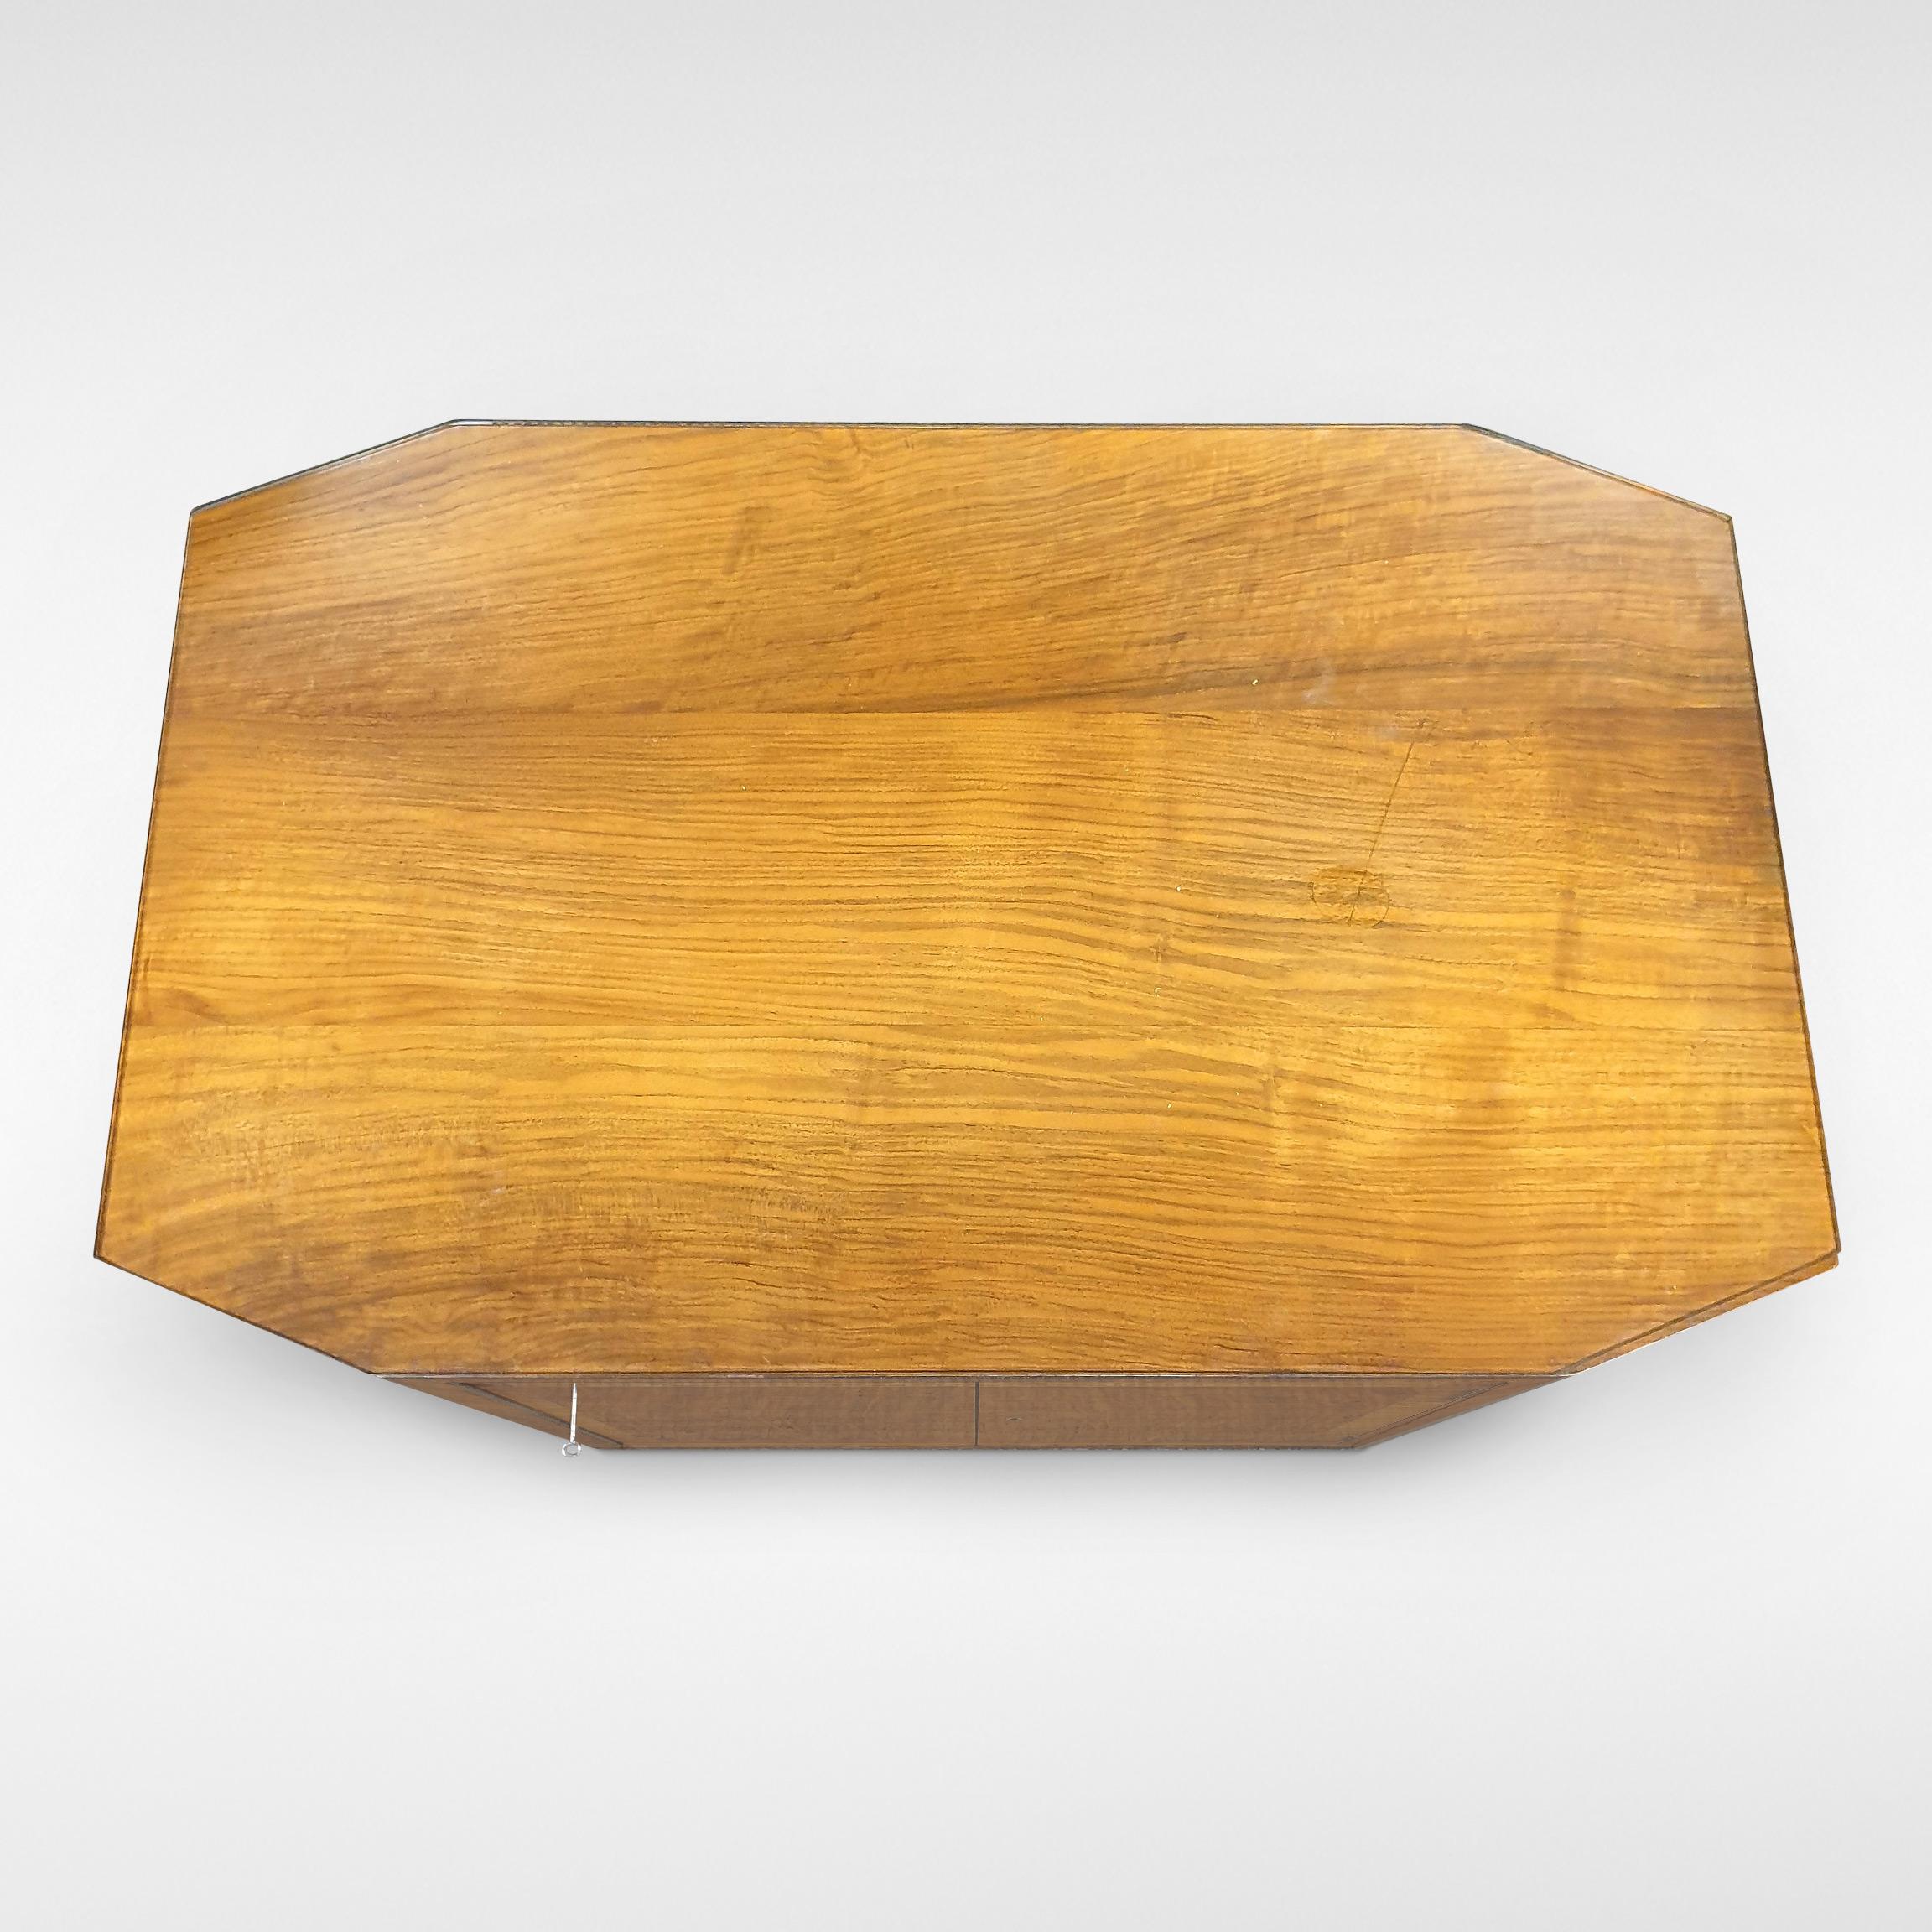 Art Deco Cocktail Table in Walnut and Macassar Ebony For Sale 3